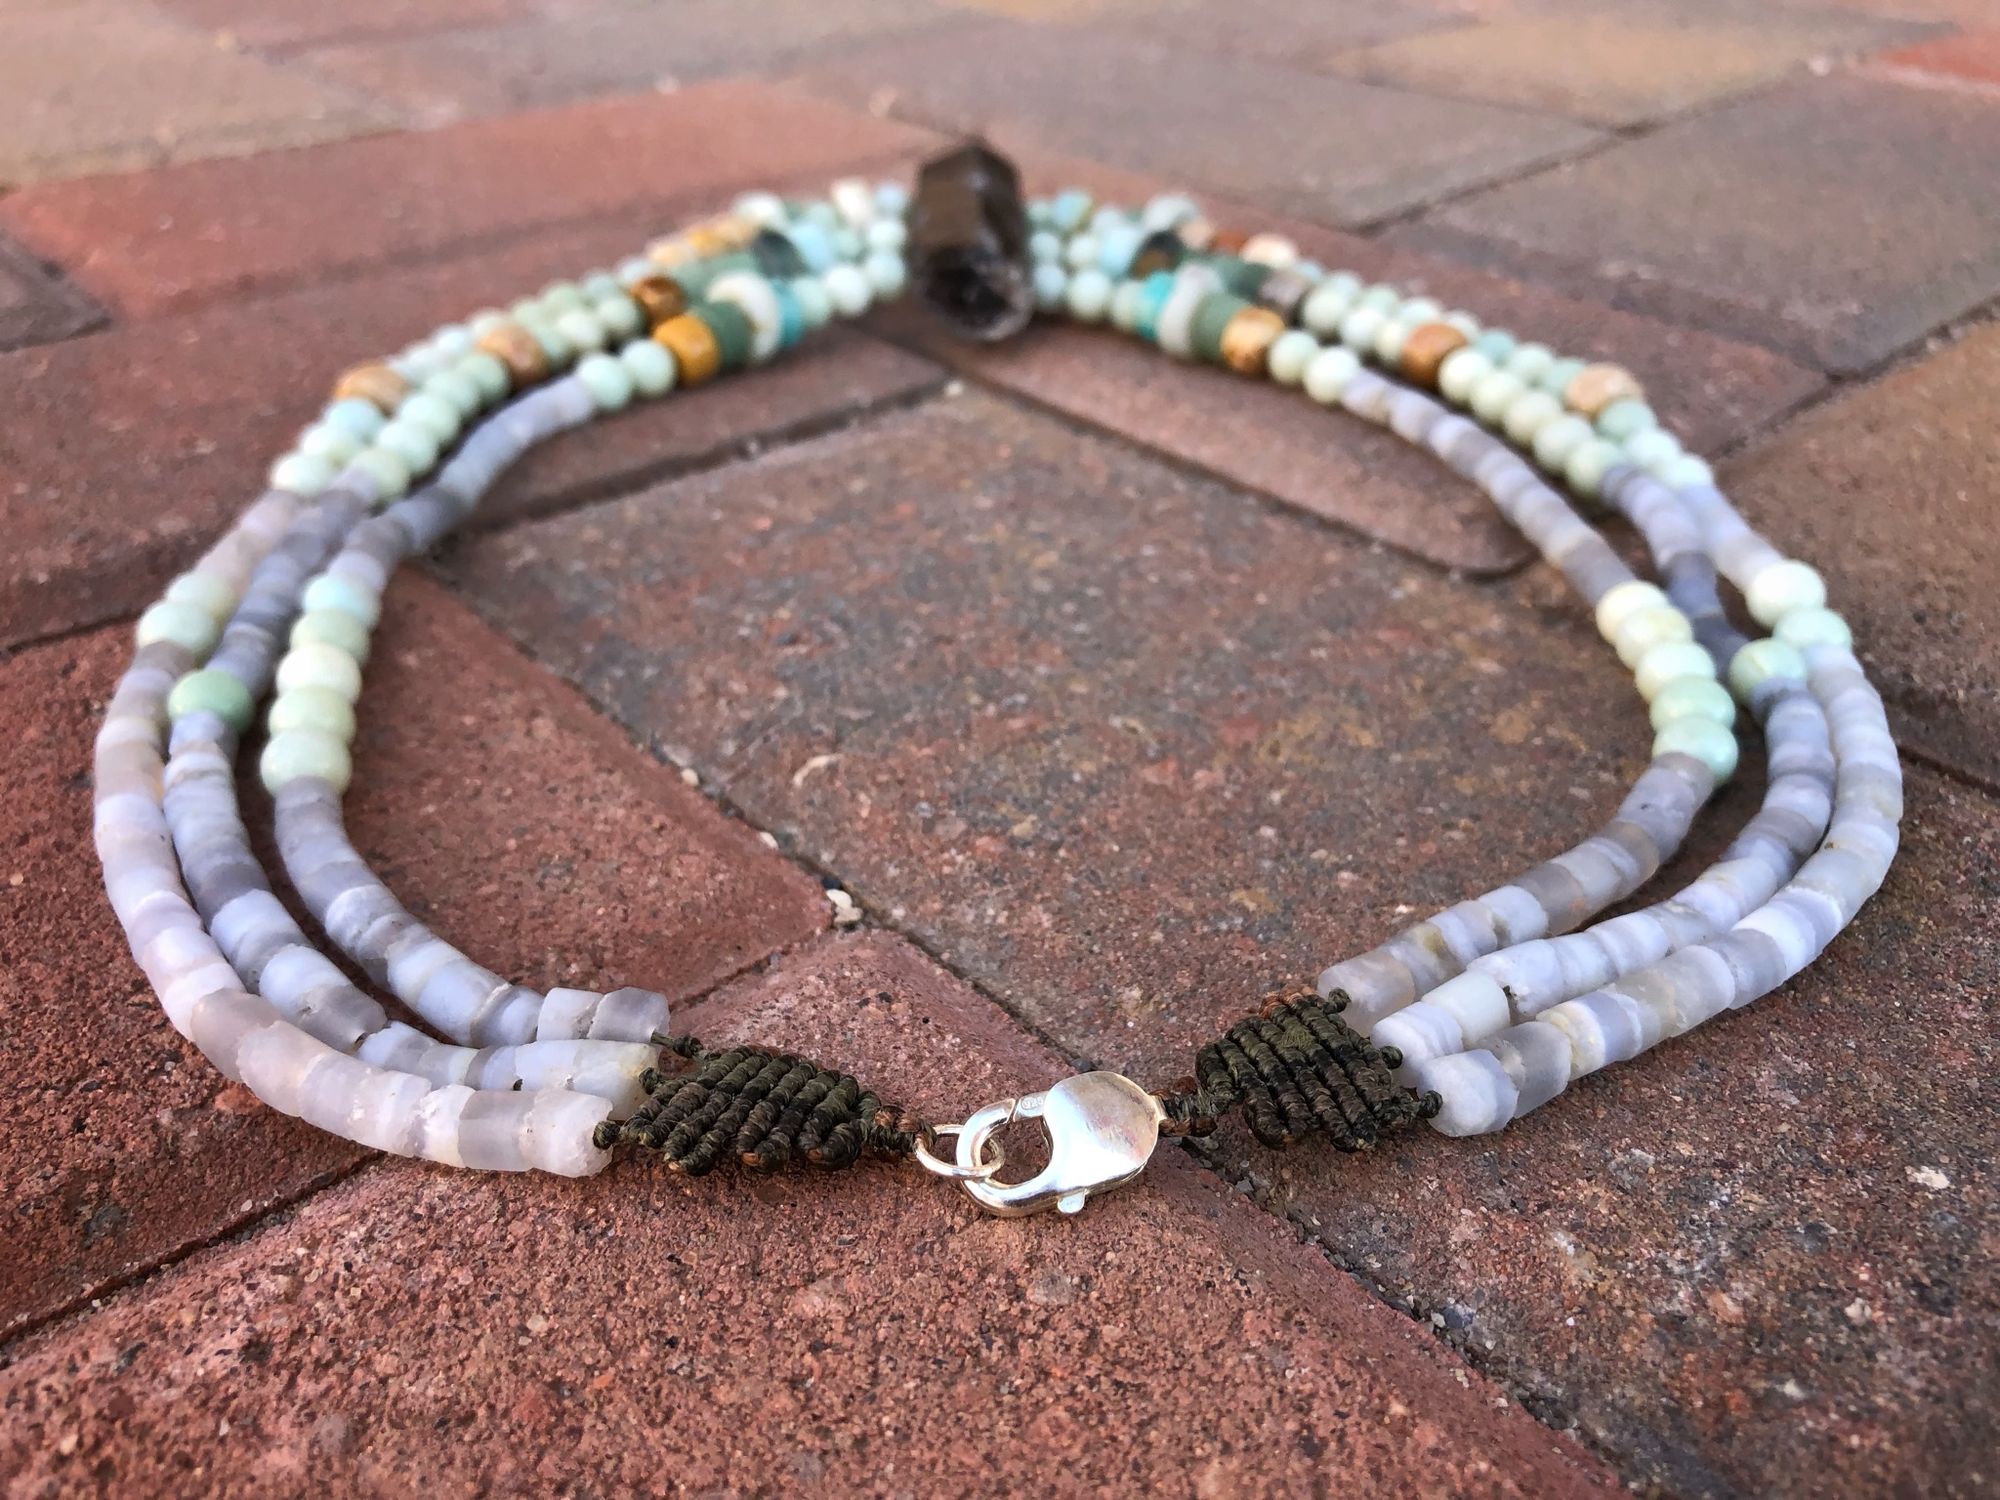 three strand necklace made with a grey crystal point and blue-green beads laying on a red brick floor